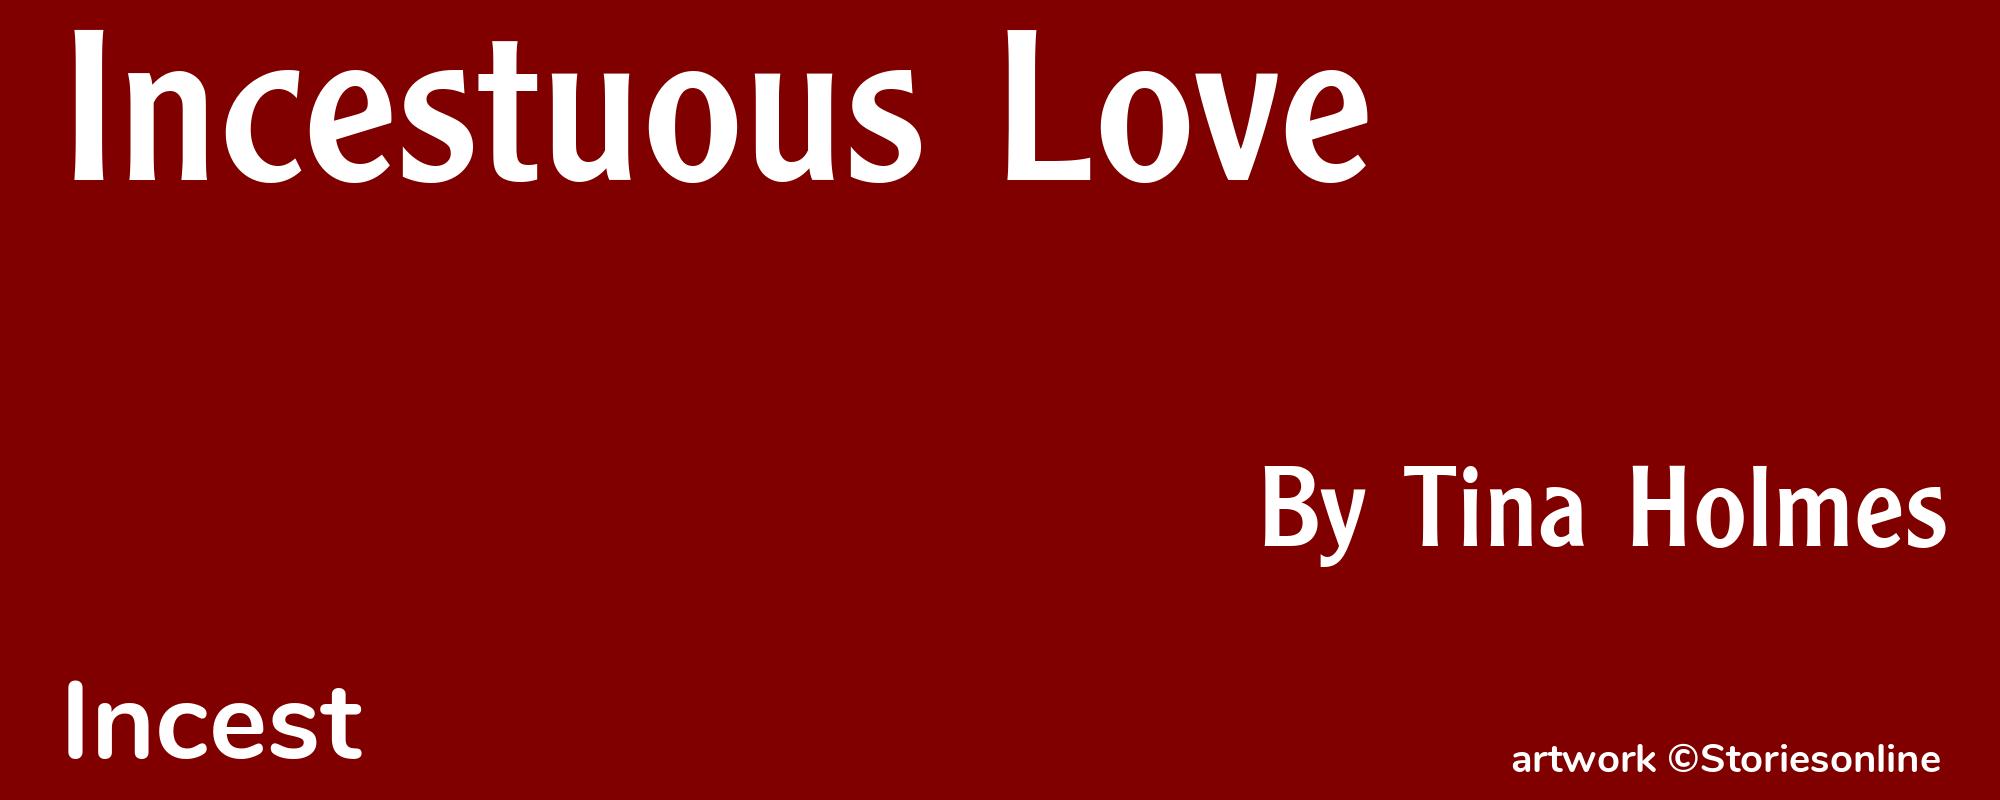 Incestuous Love - Cover